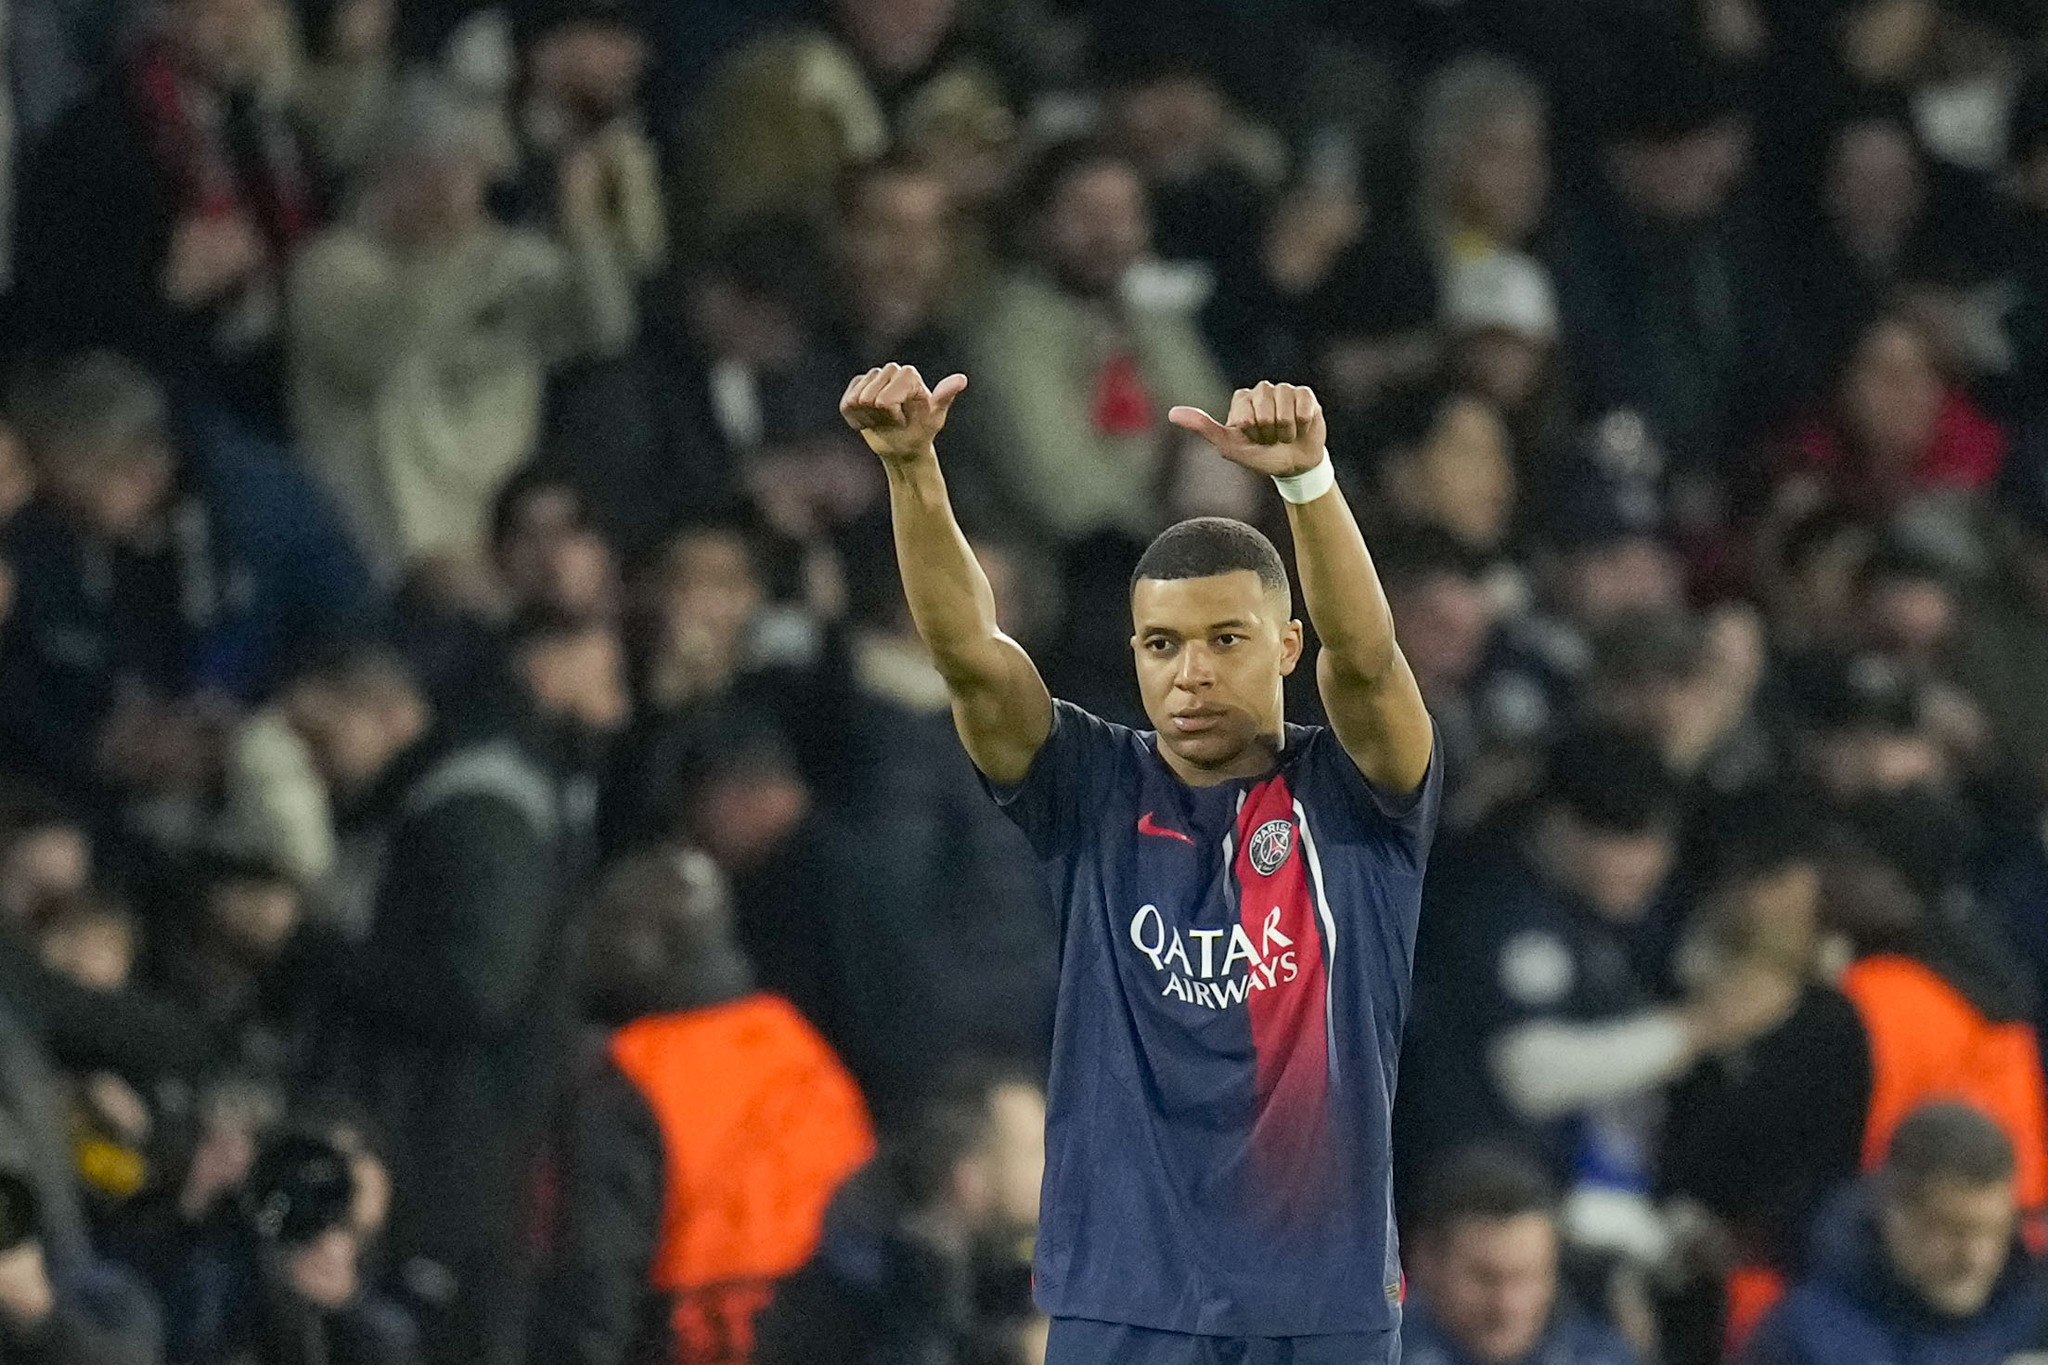 PSGs Kylian Mbappe celebrates after scoring his sides opening goal